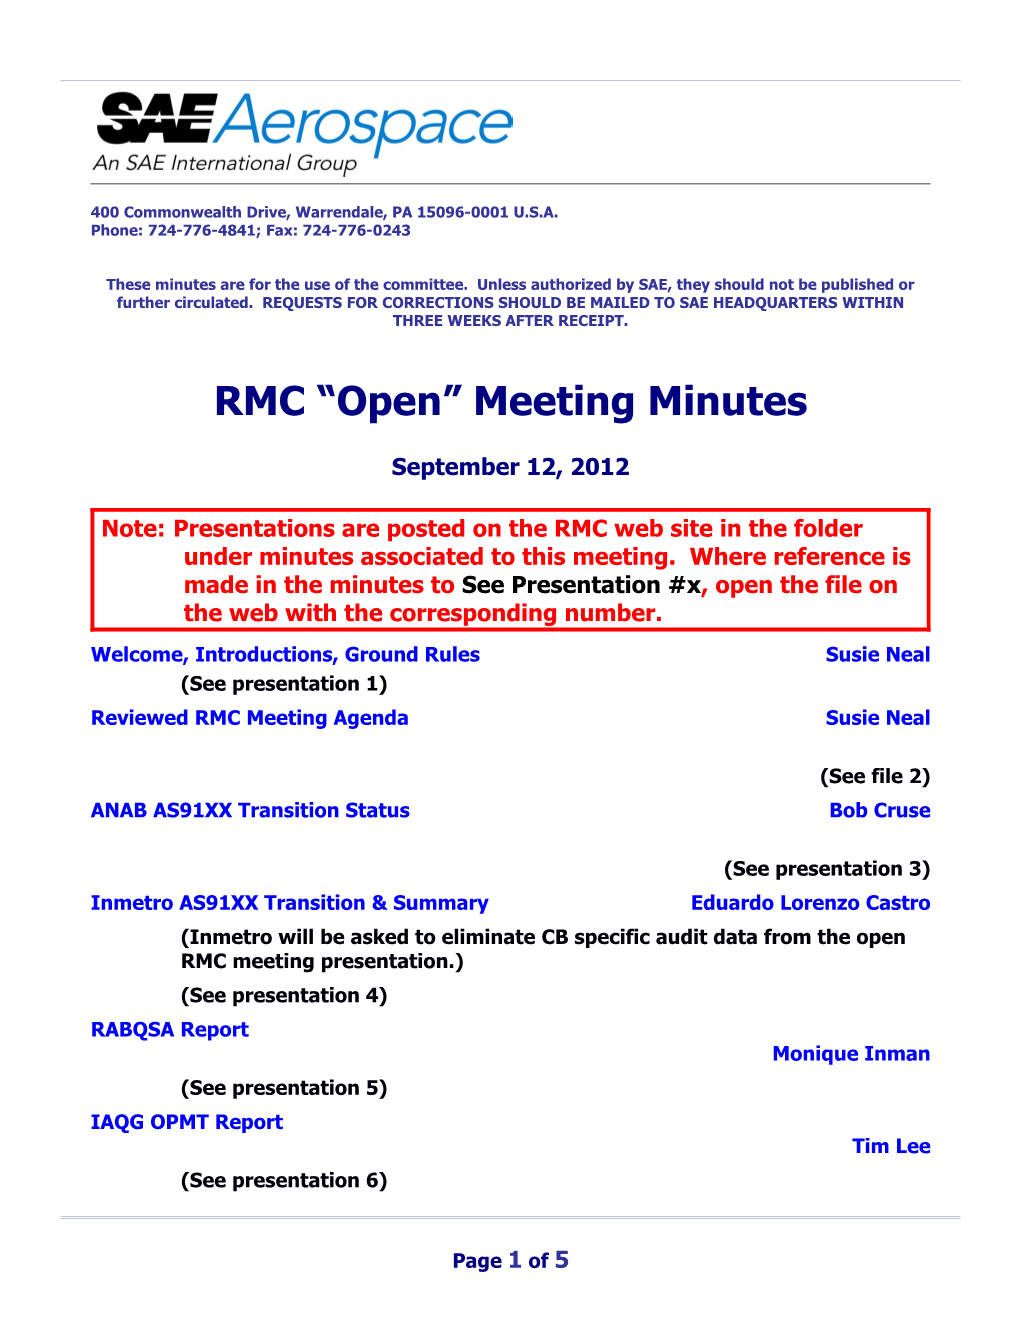 RMC Meeting Minutes s1